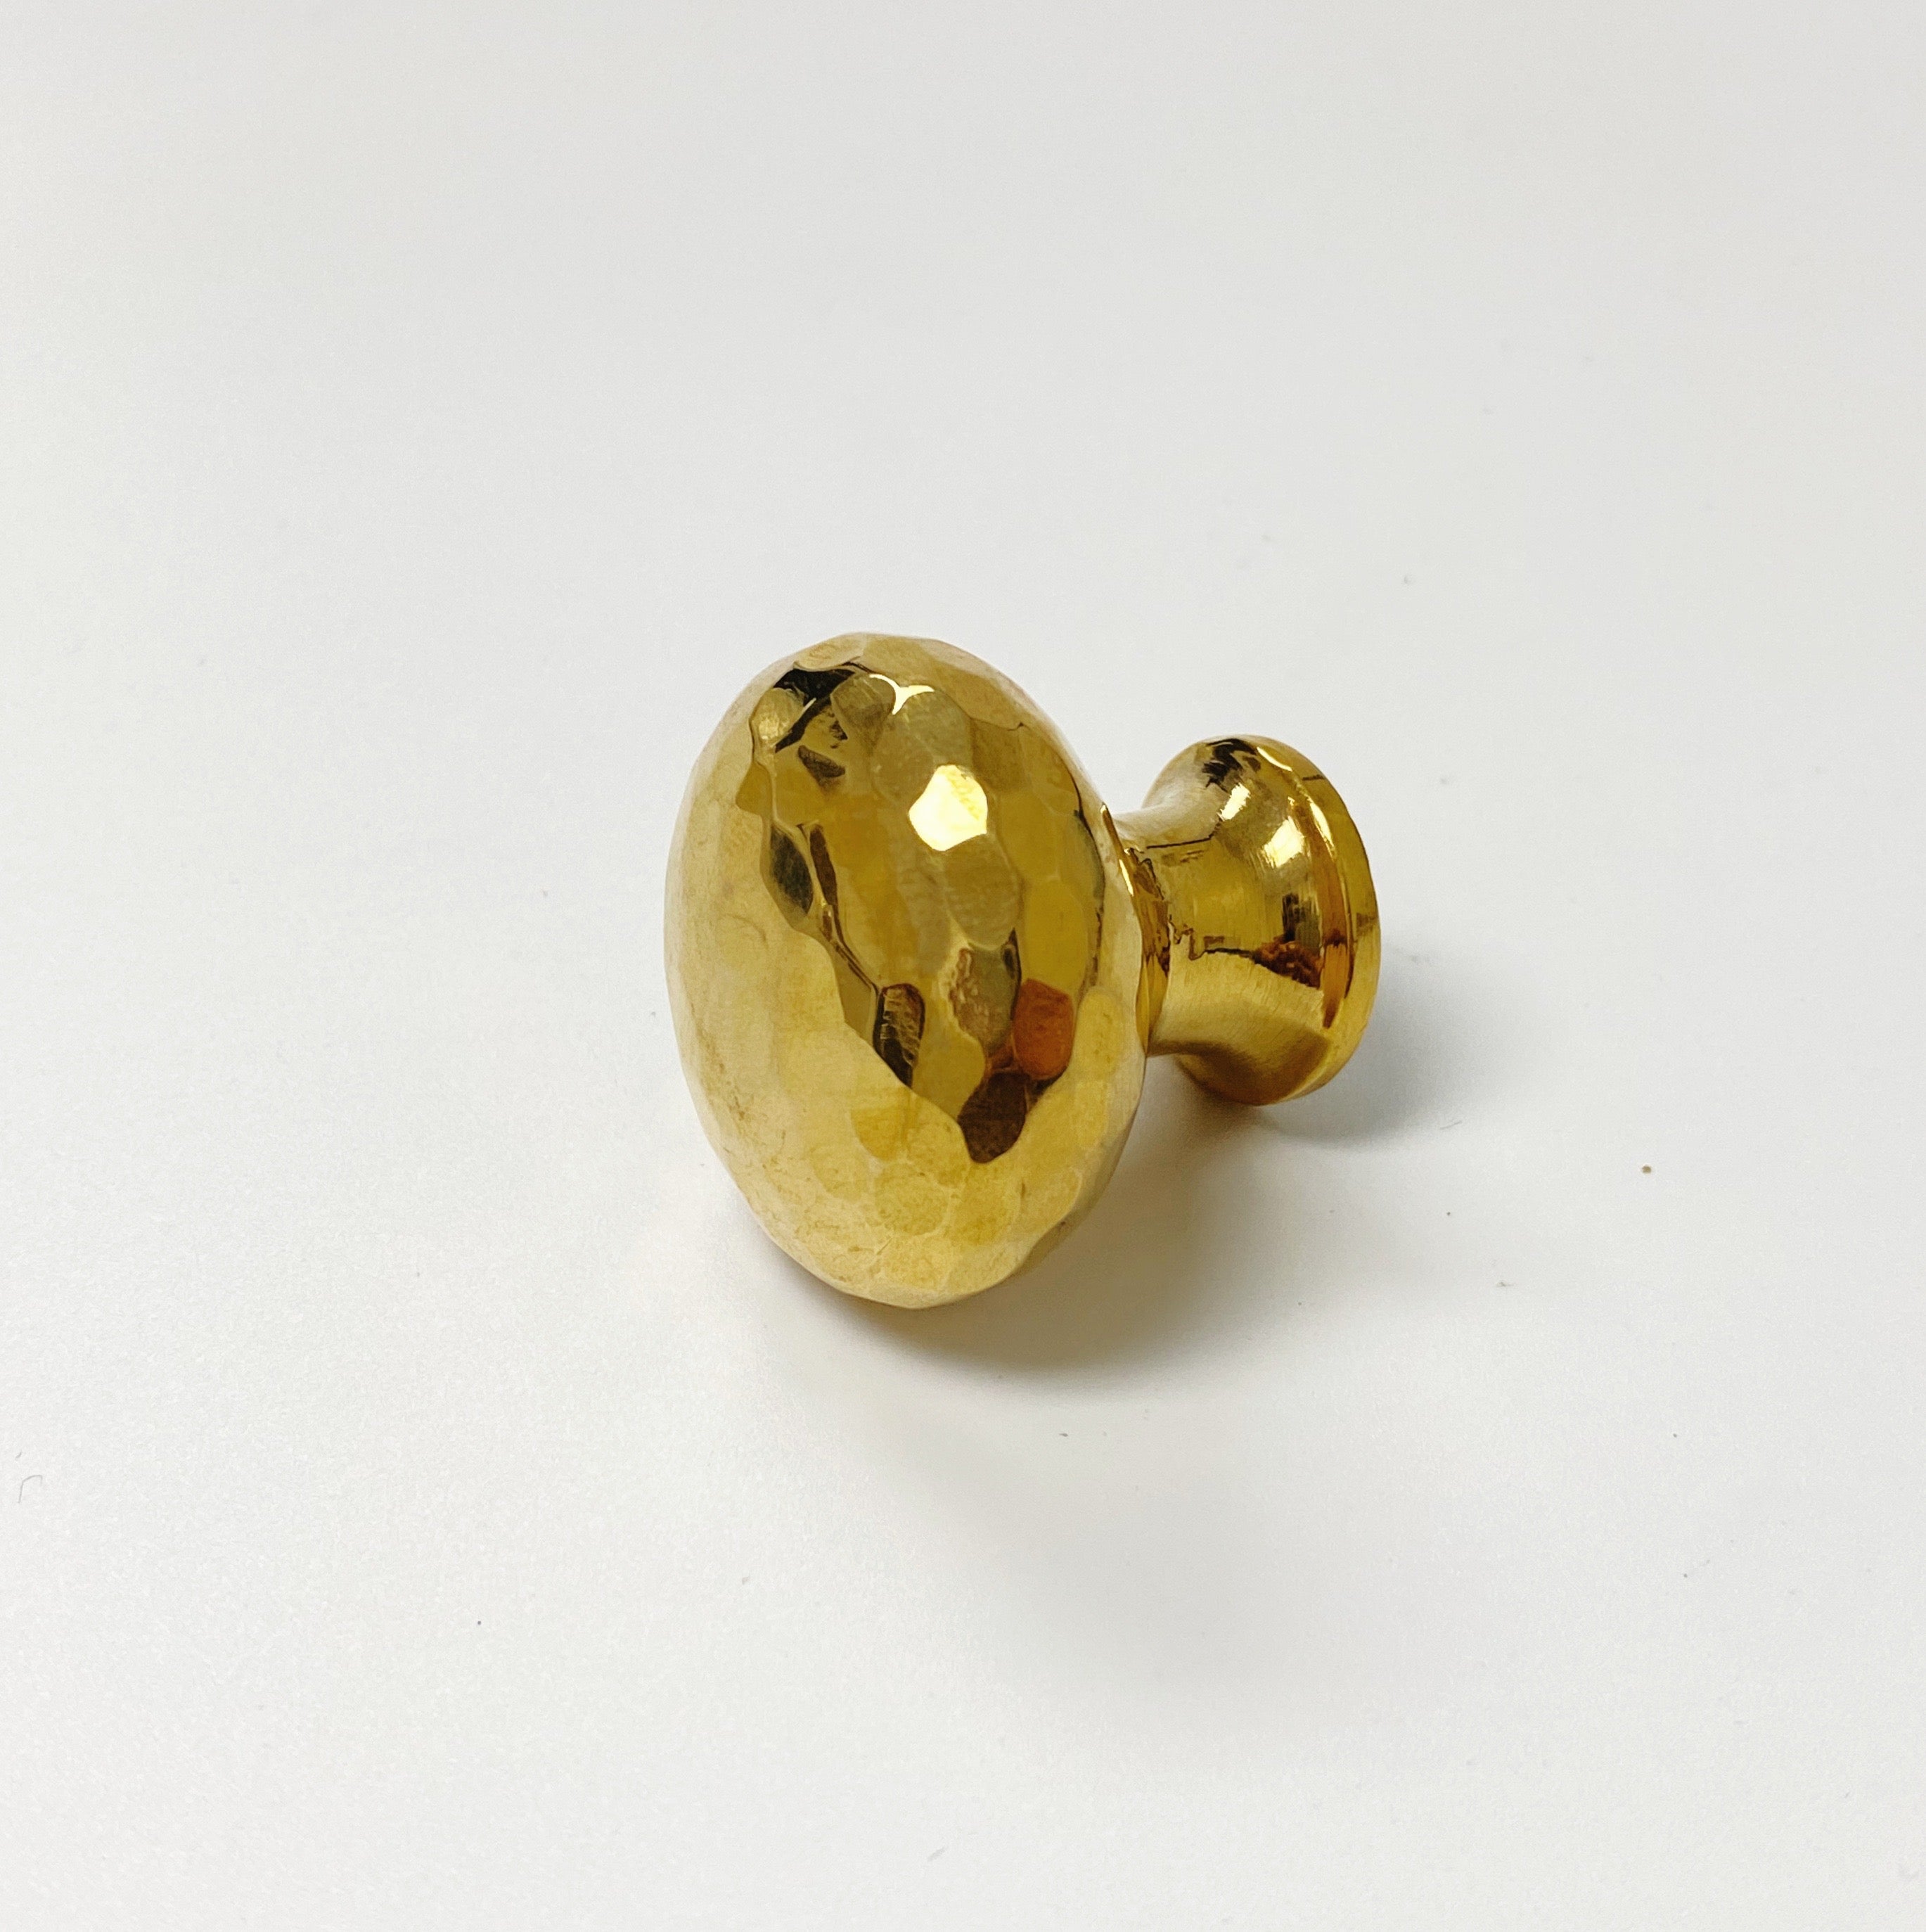 Unlacquered Brass "Aspen" Hammered Cabinet Knob and Ring Pulls - Industry Hardware